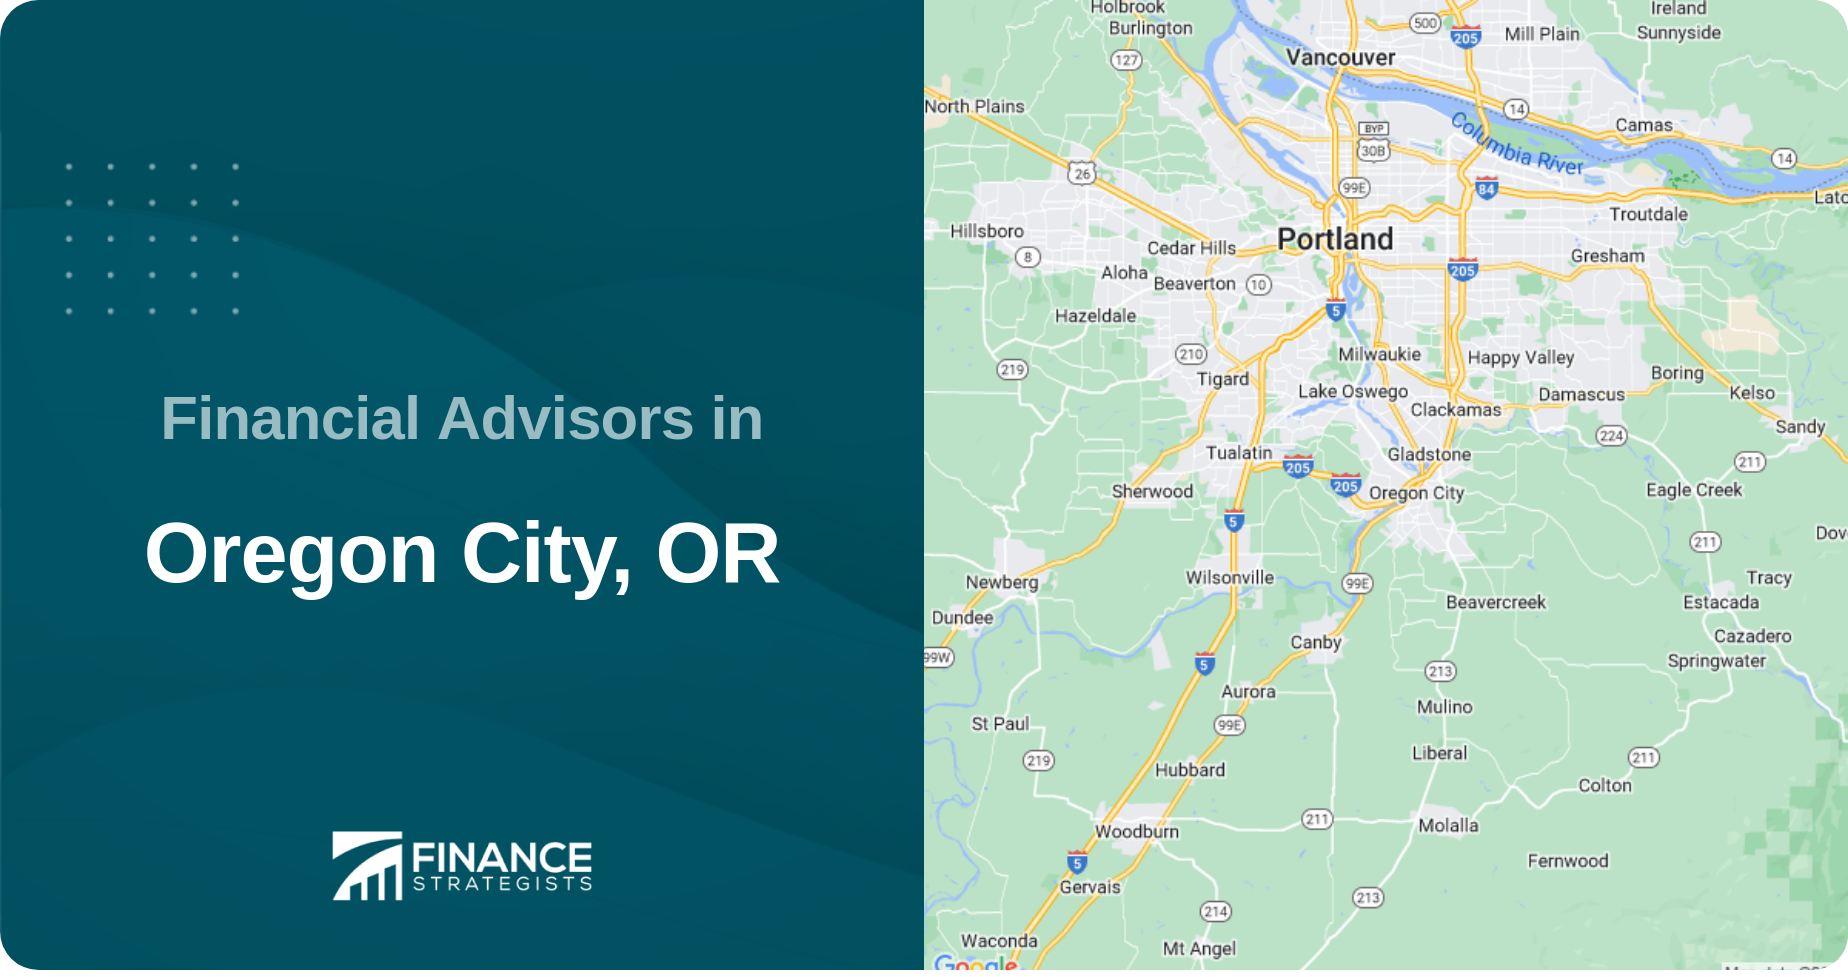 Financial Advisors in Oregon City, OR